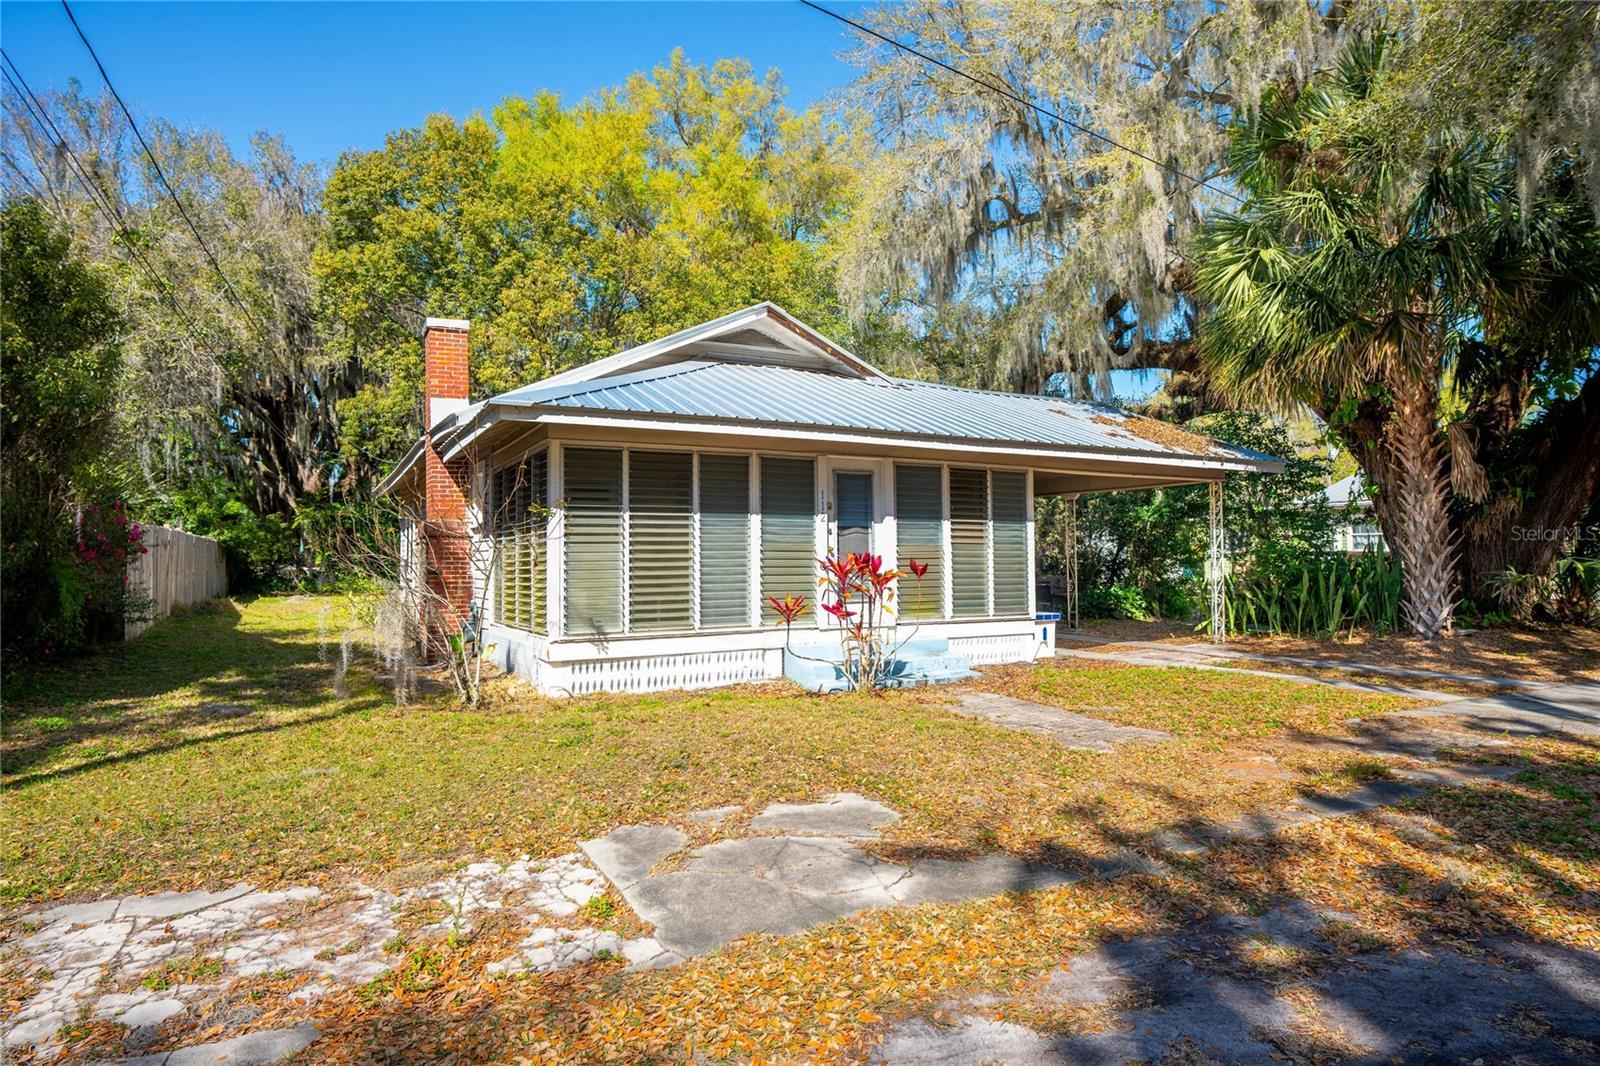 Photo one of 112 1St Nw St Fort Meade FL 33841 | MLS P4929409